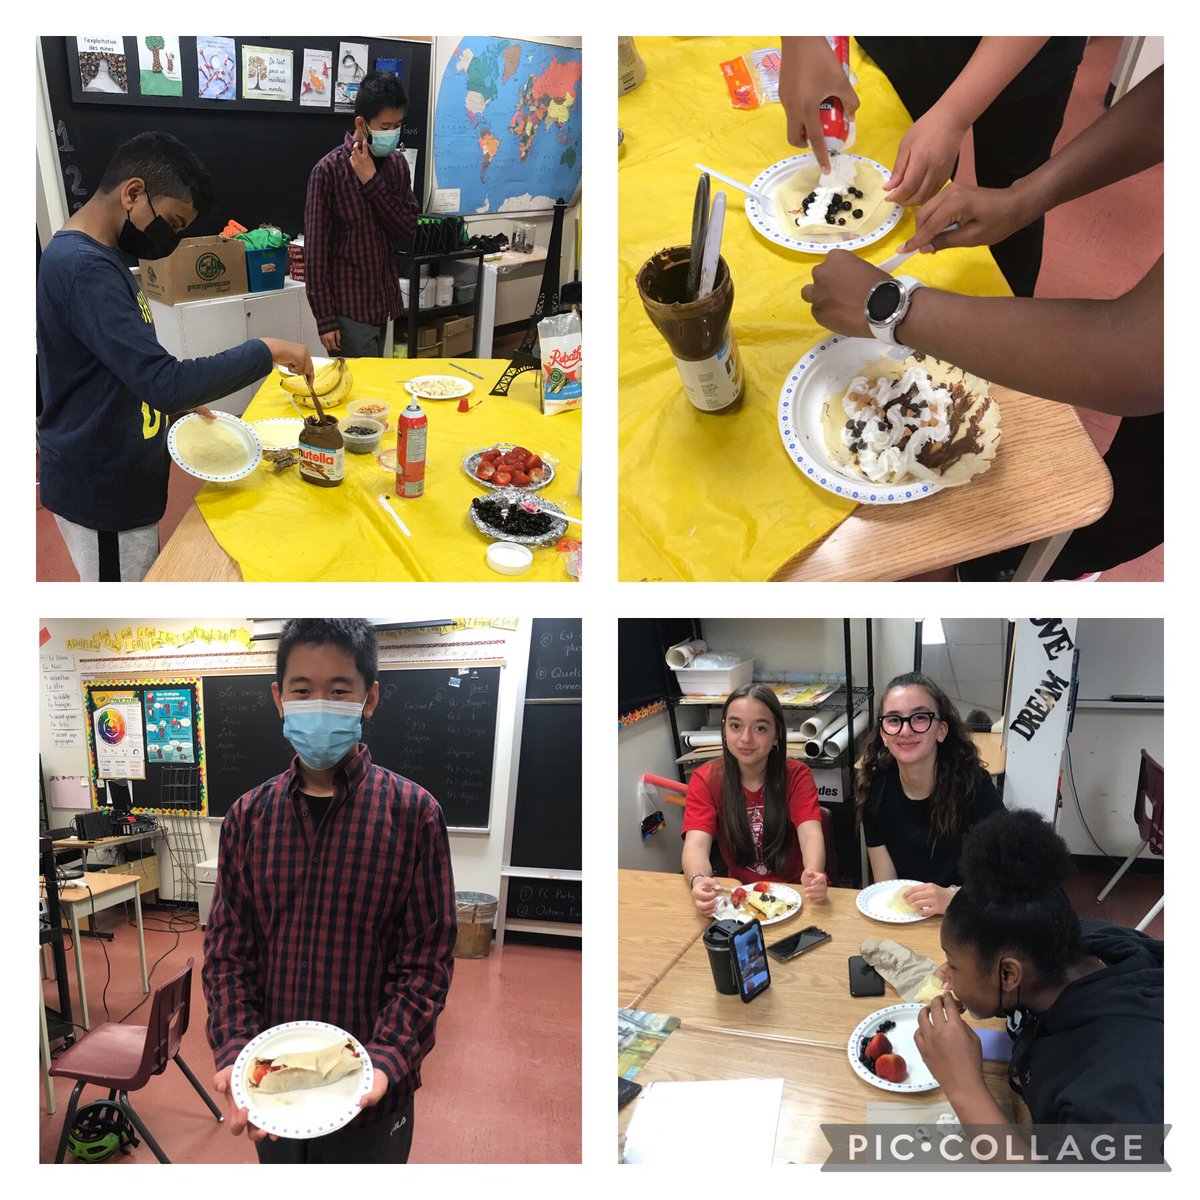 Ss in 7F @JbtyrrellS are making crepes whilst learning how to follow French instructions. Simply delicious! @LN10Alvarez